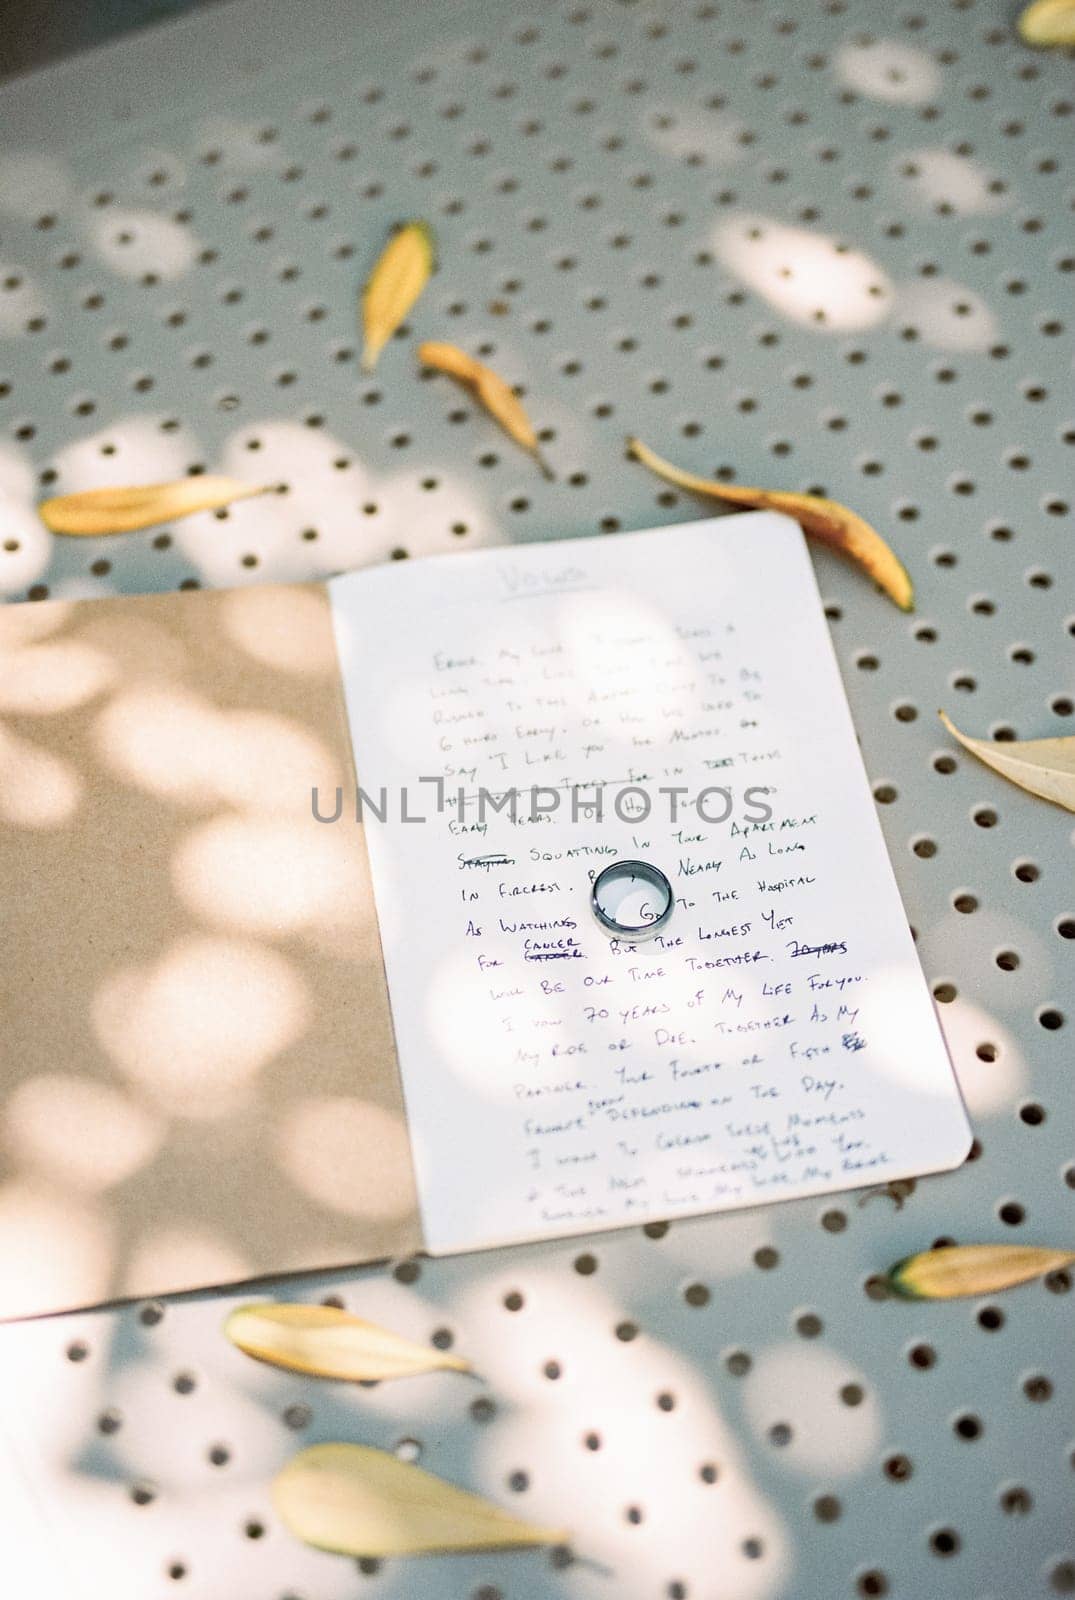 Wedding ring lies on the wedding vows in a notebook on the table among the yellow leaves by Nadtochiy